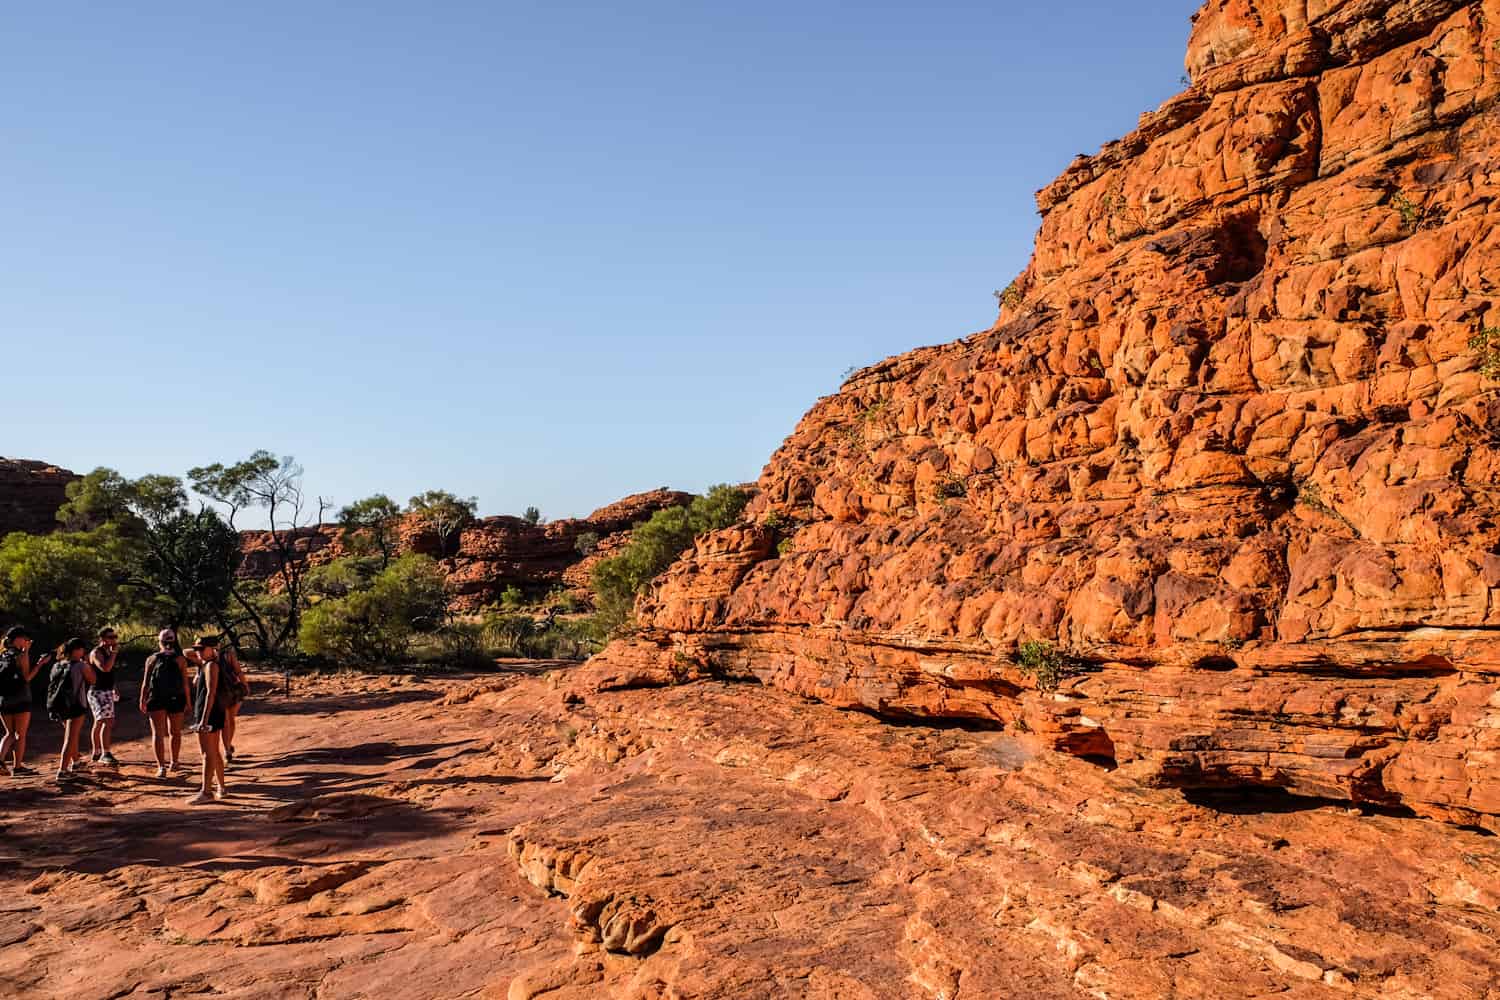 Travellers on the Kings Canyon Hike in the Australian Outback.